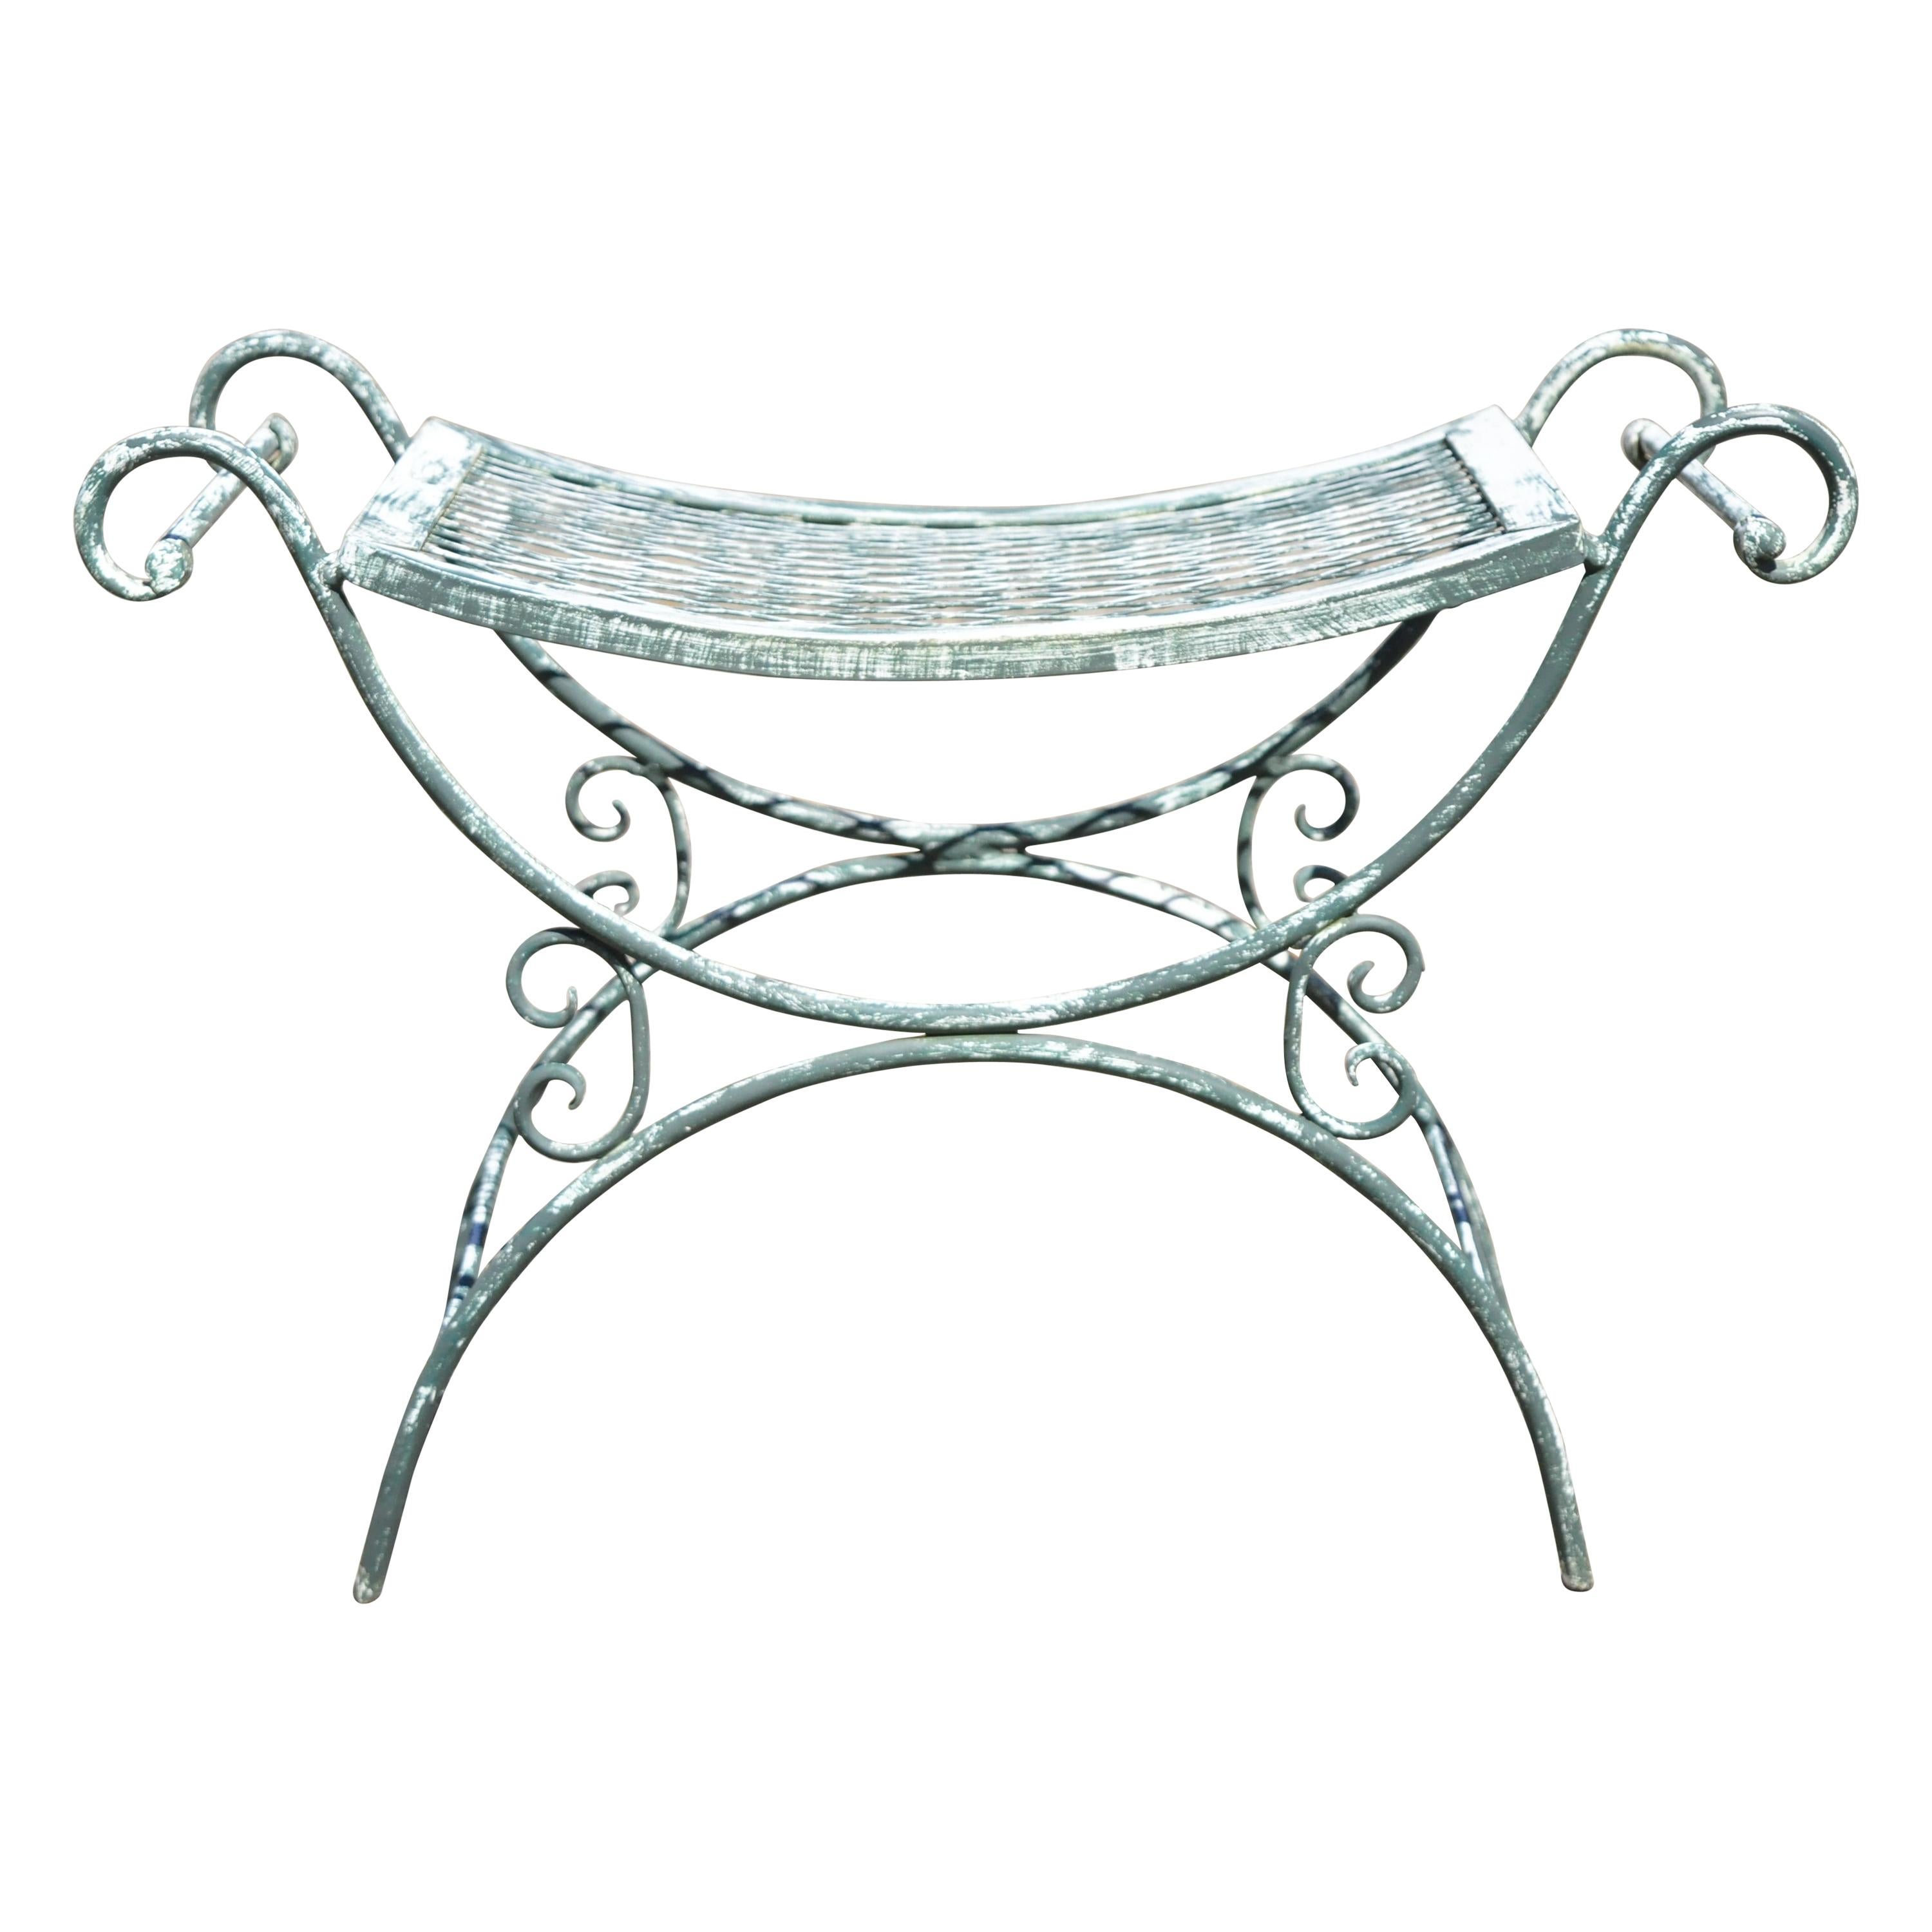 Vintage Wrought Iron Curule Mesh Bench Mid Century Green White Hollywood Regency